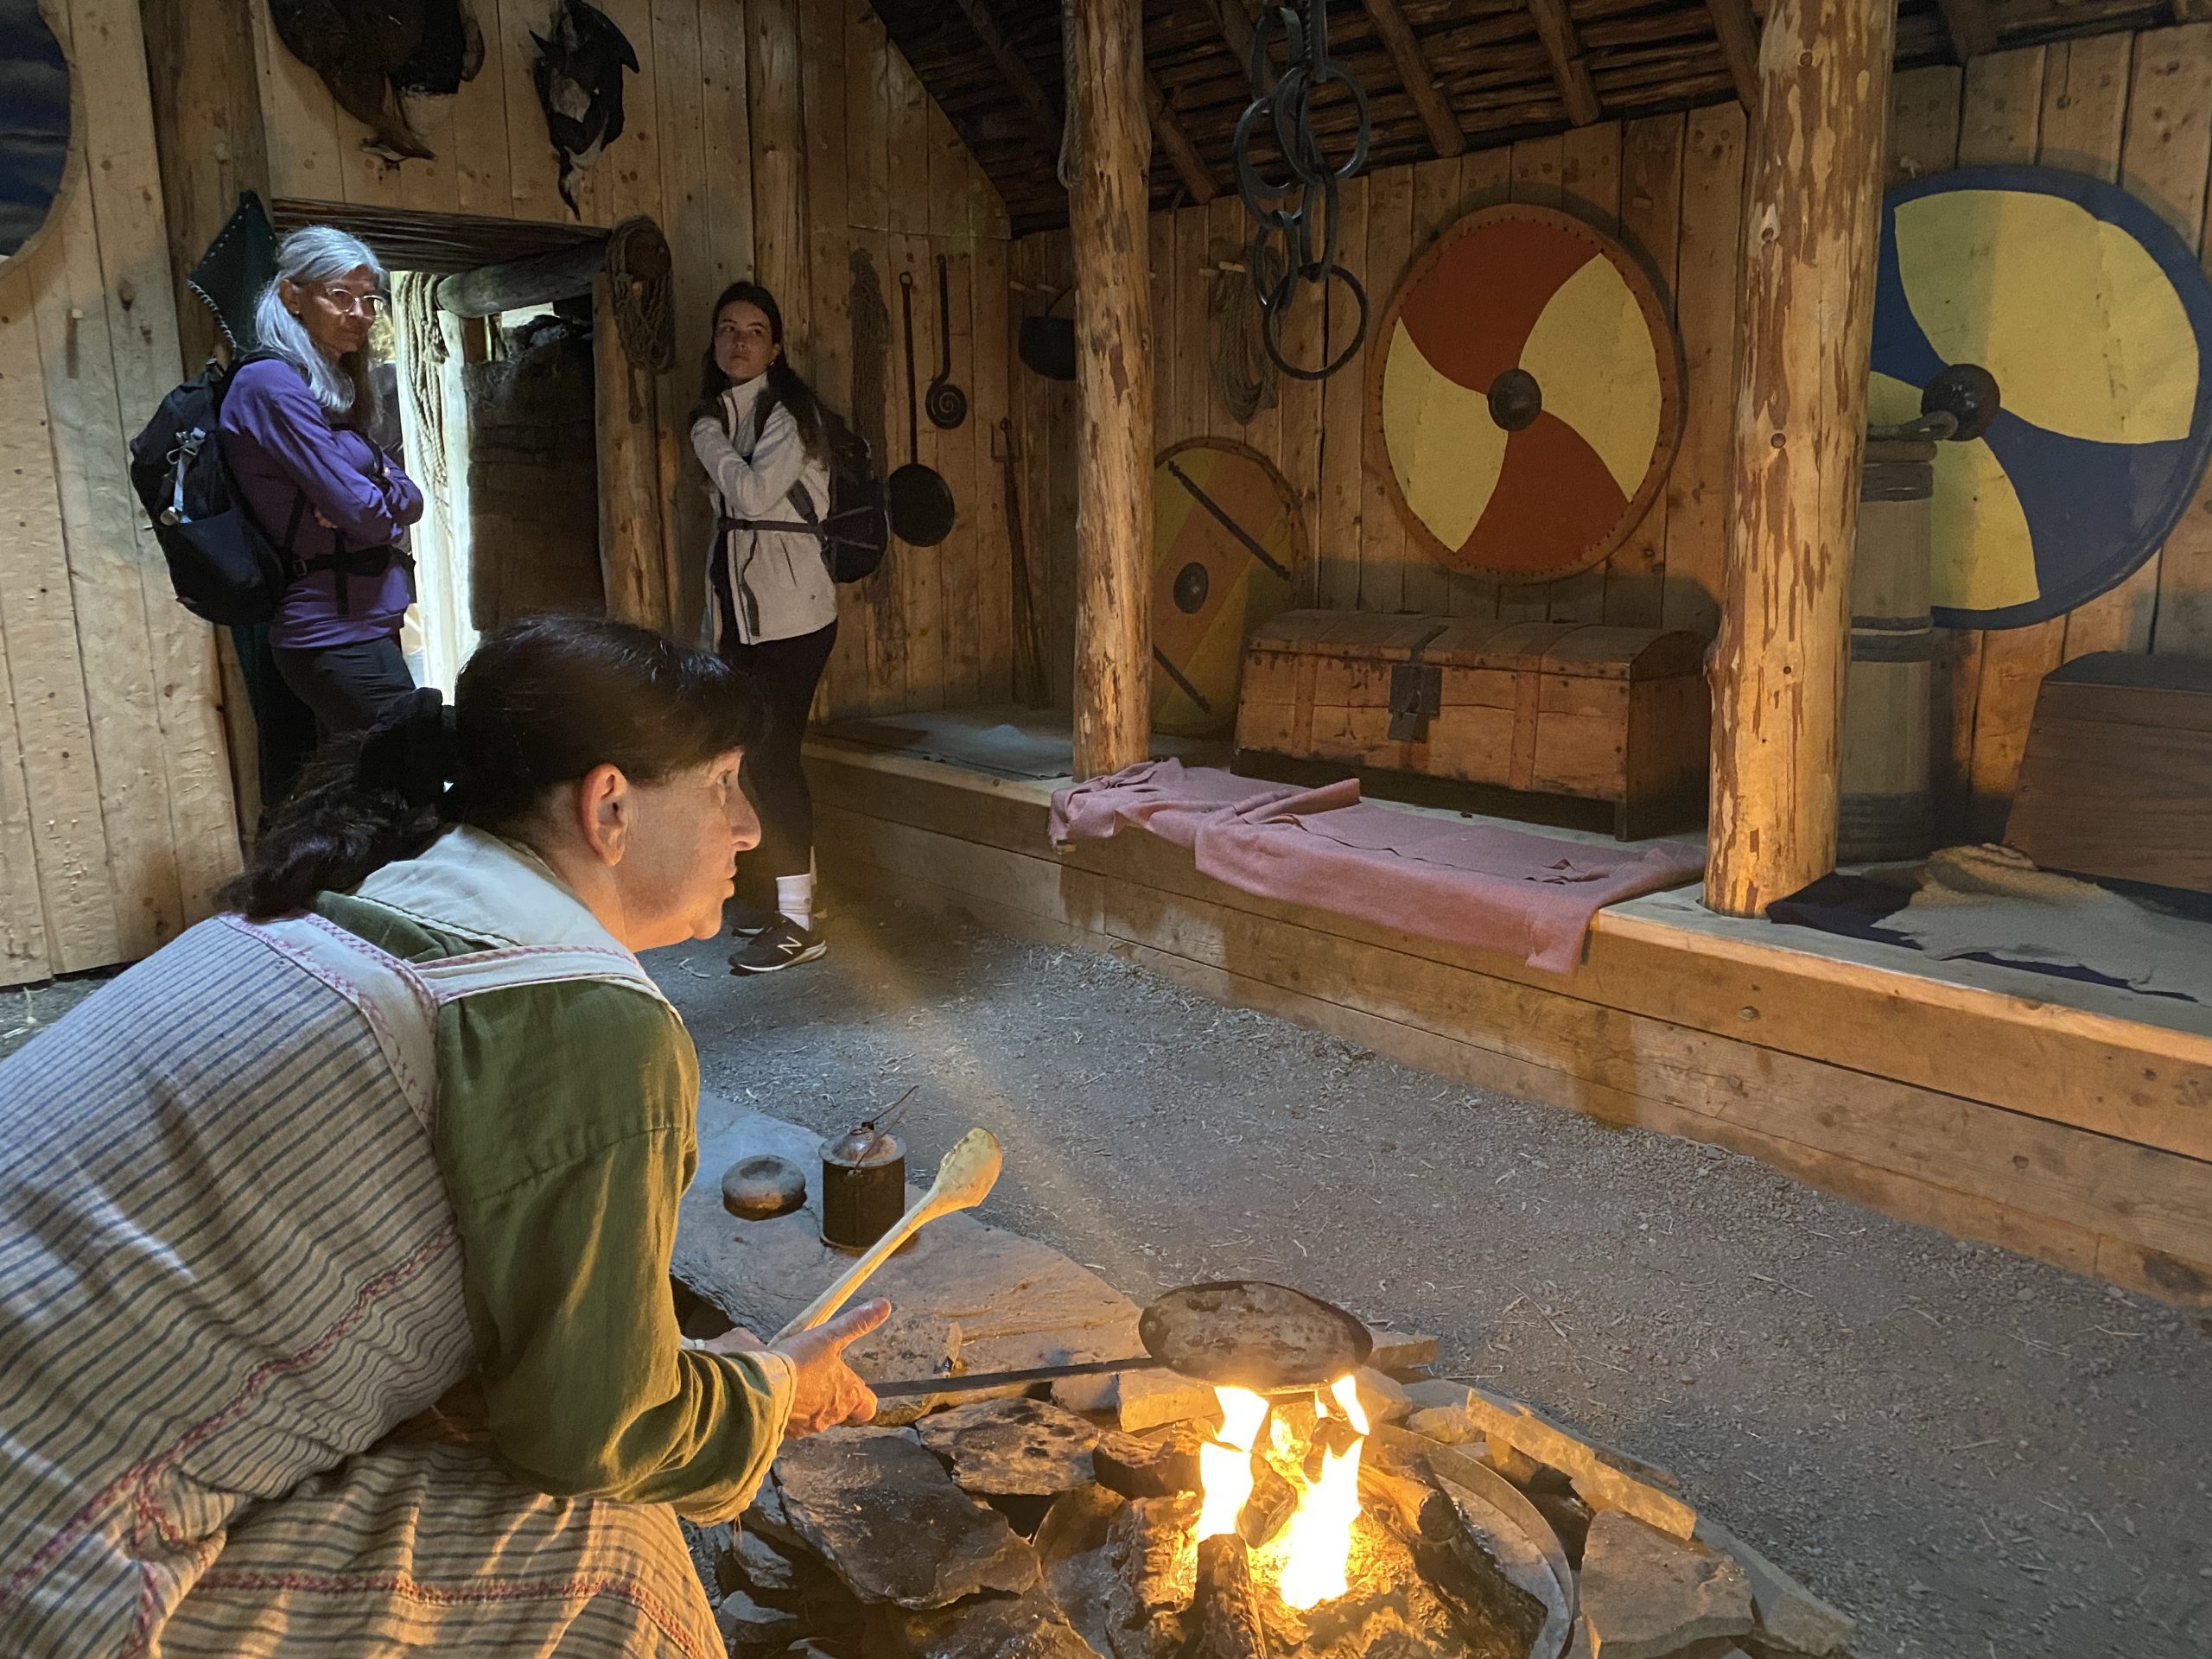 A woman making flatbread in the common room in a recreation of a 1,000 year old Norse sod house. The bread was tasty.